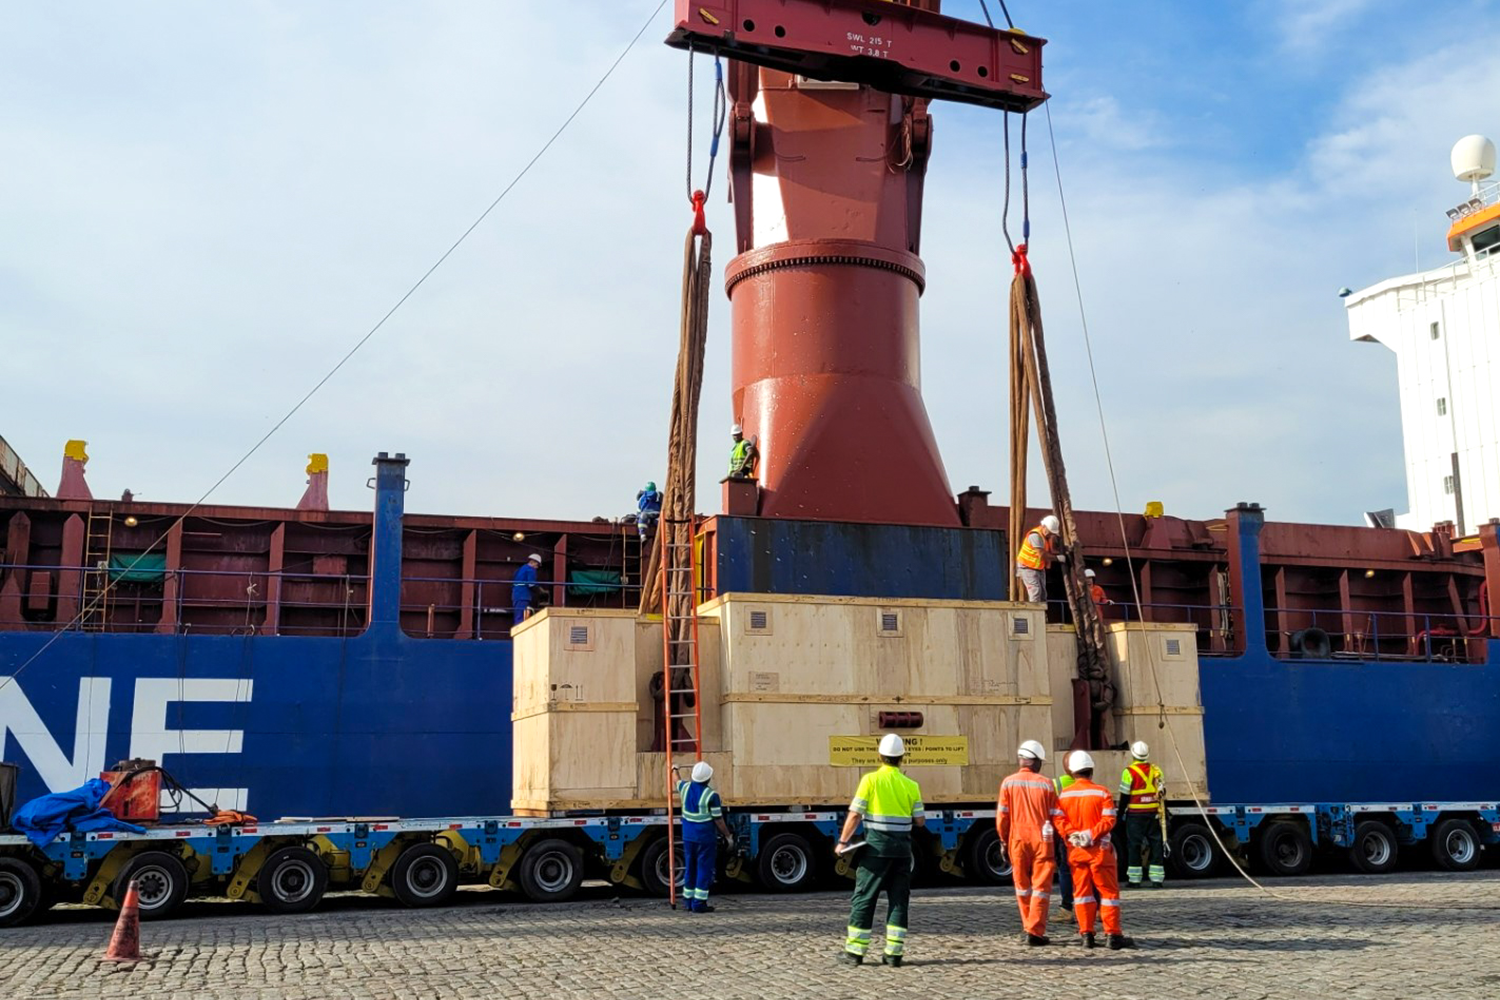 Workers at port standing around giant shipment being held by crane